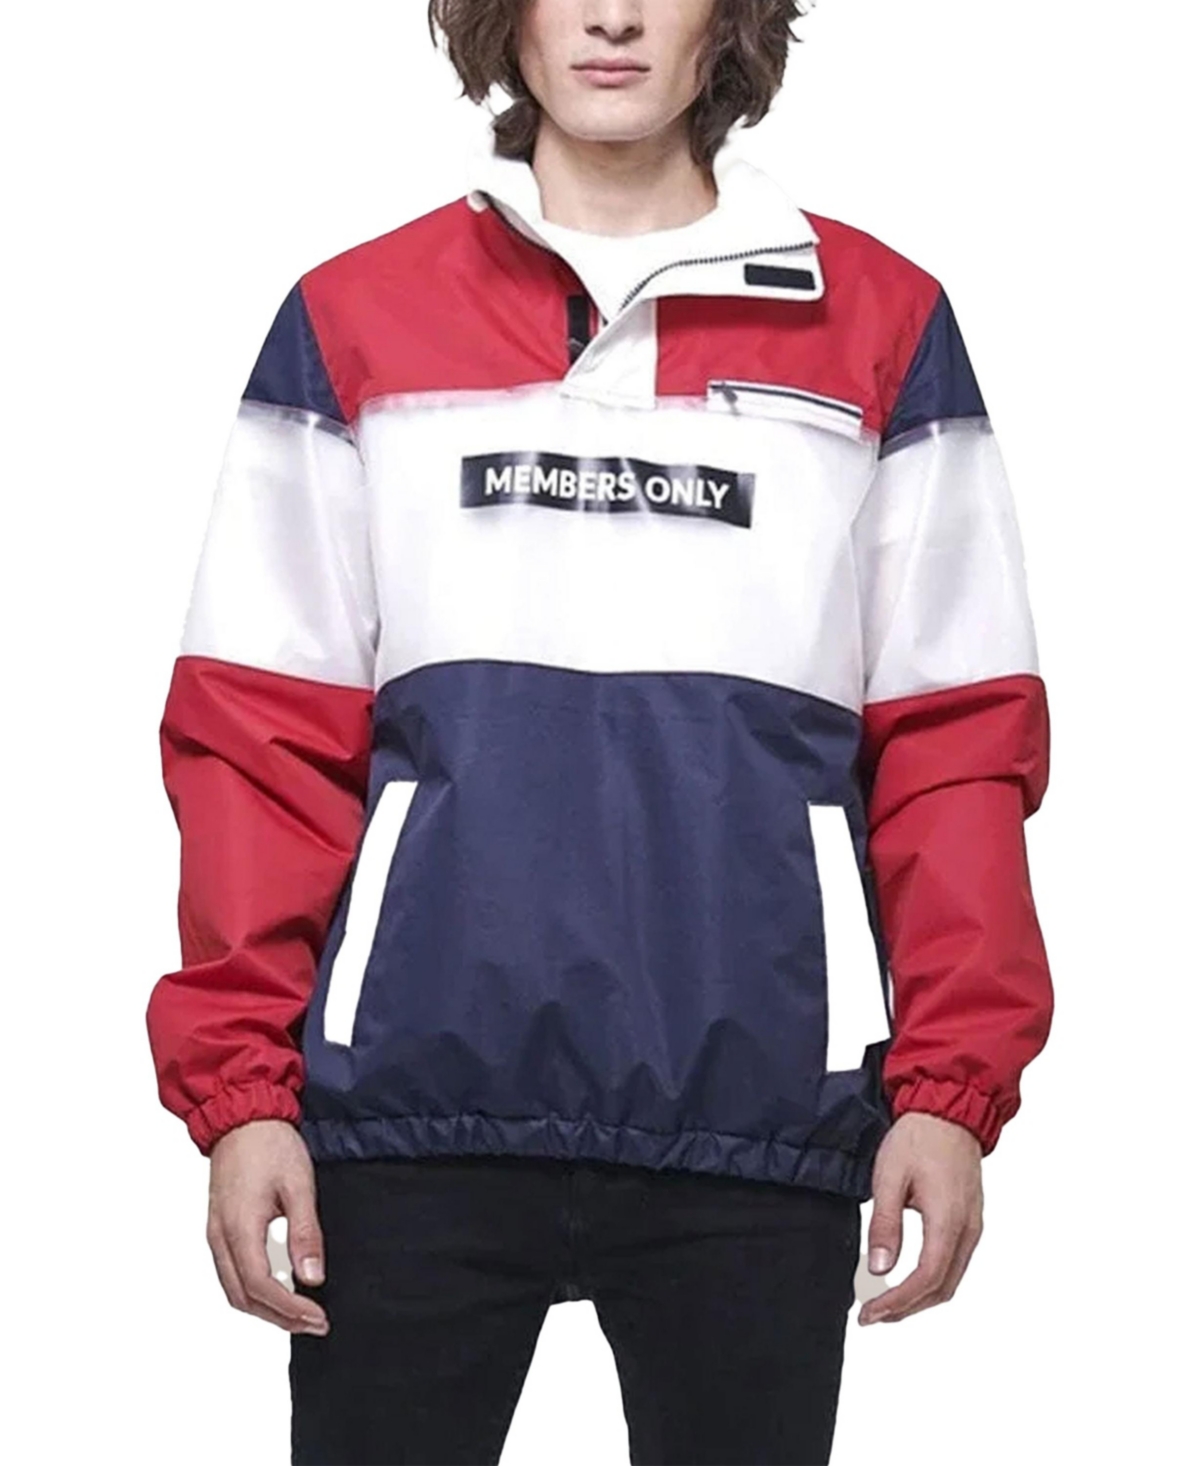 Men's Color and Translucent Block Jacket - Red